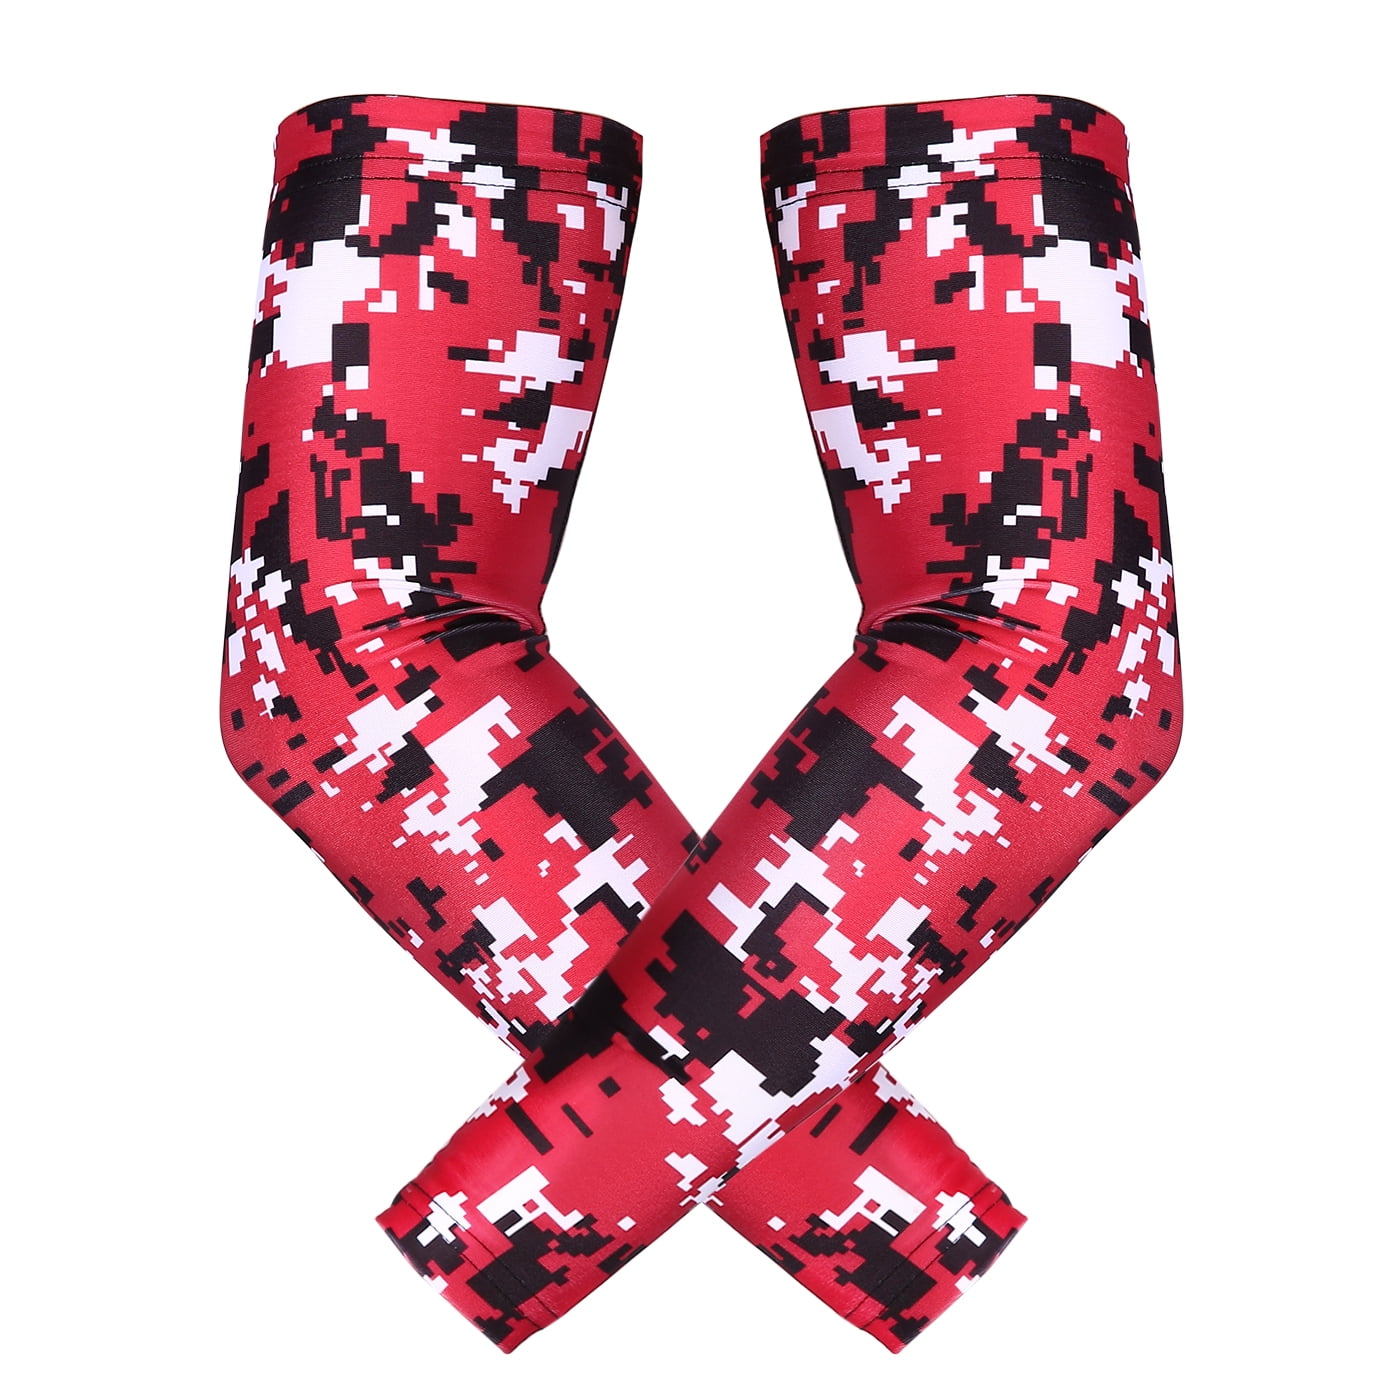 2 Pieces Youth Adult Compression Arm Sleeves Baseball Digital Camo 8 Color XXS-XL COOLOMG Pair